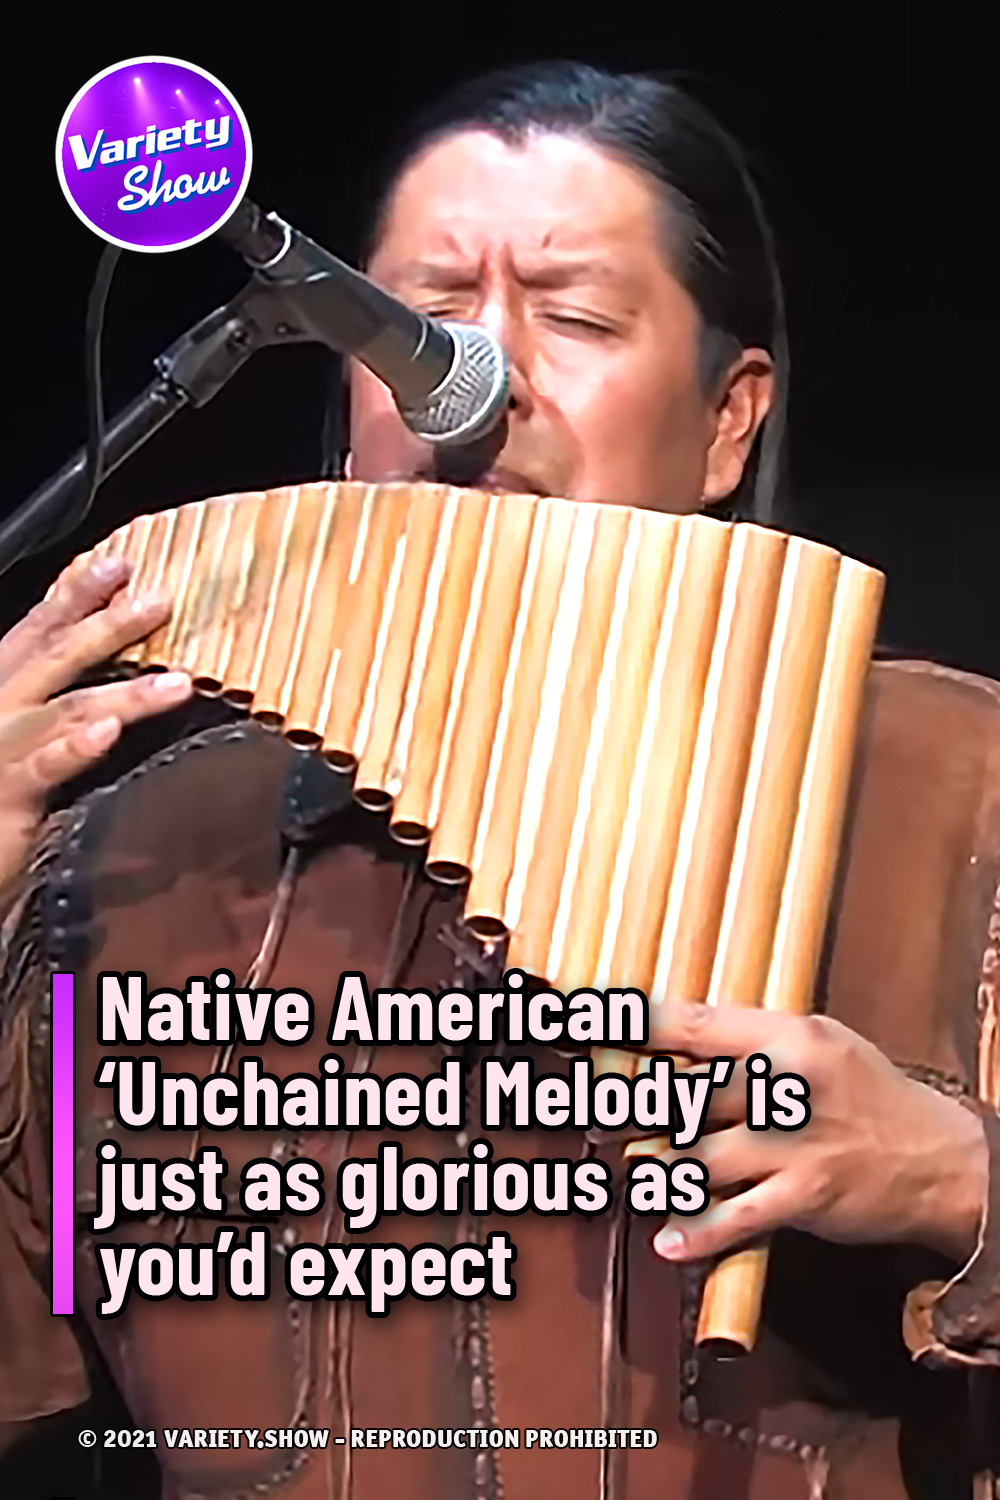 Native American ‘Unchained Melody’ is just as glorious as you’d expect